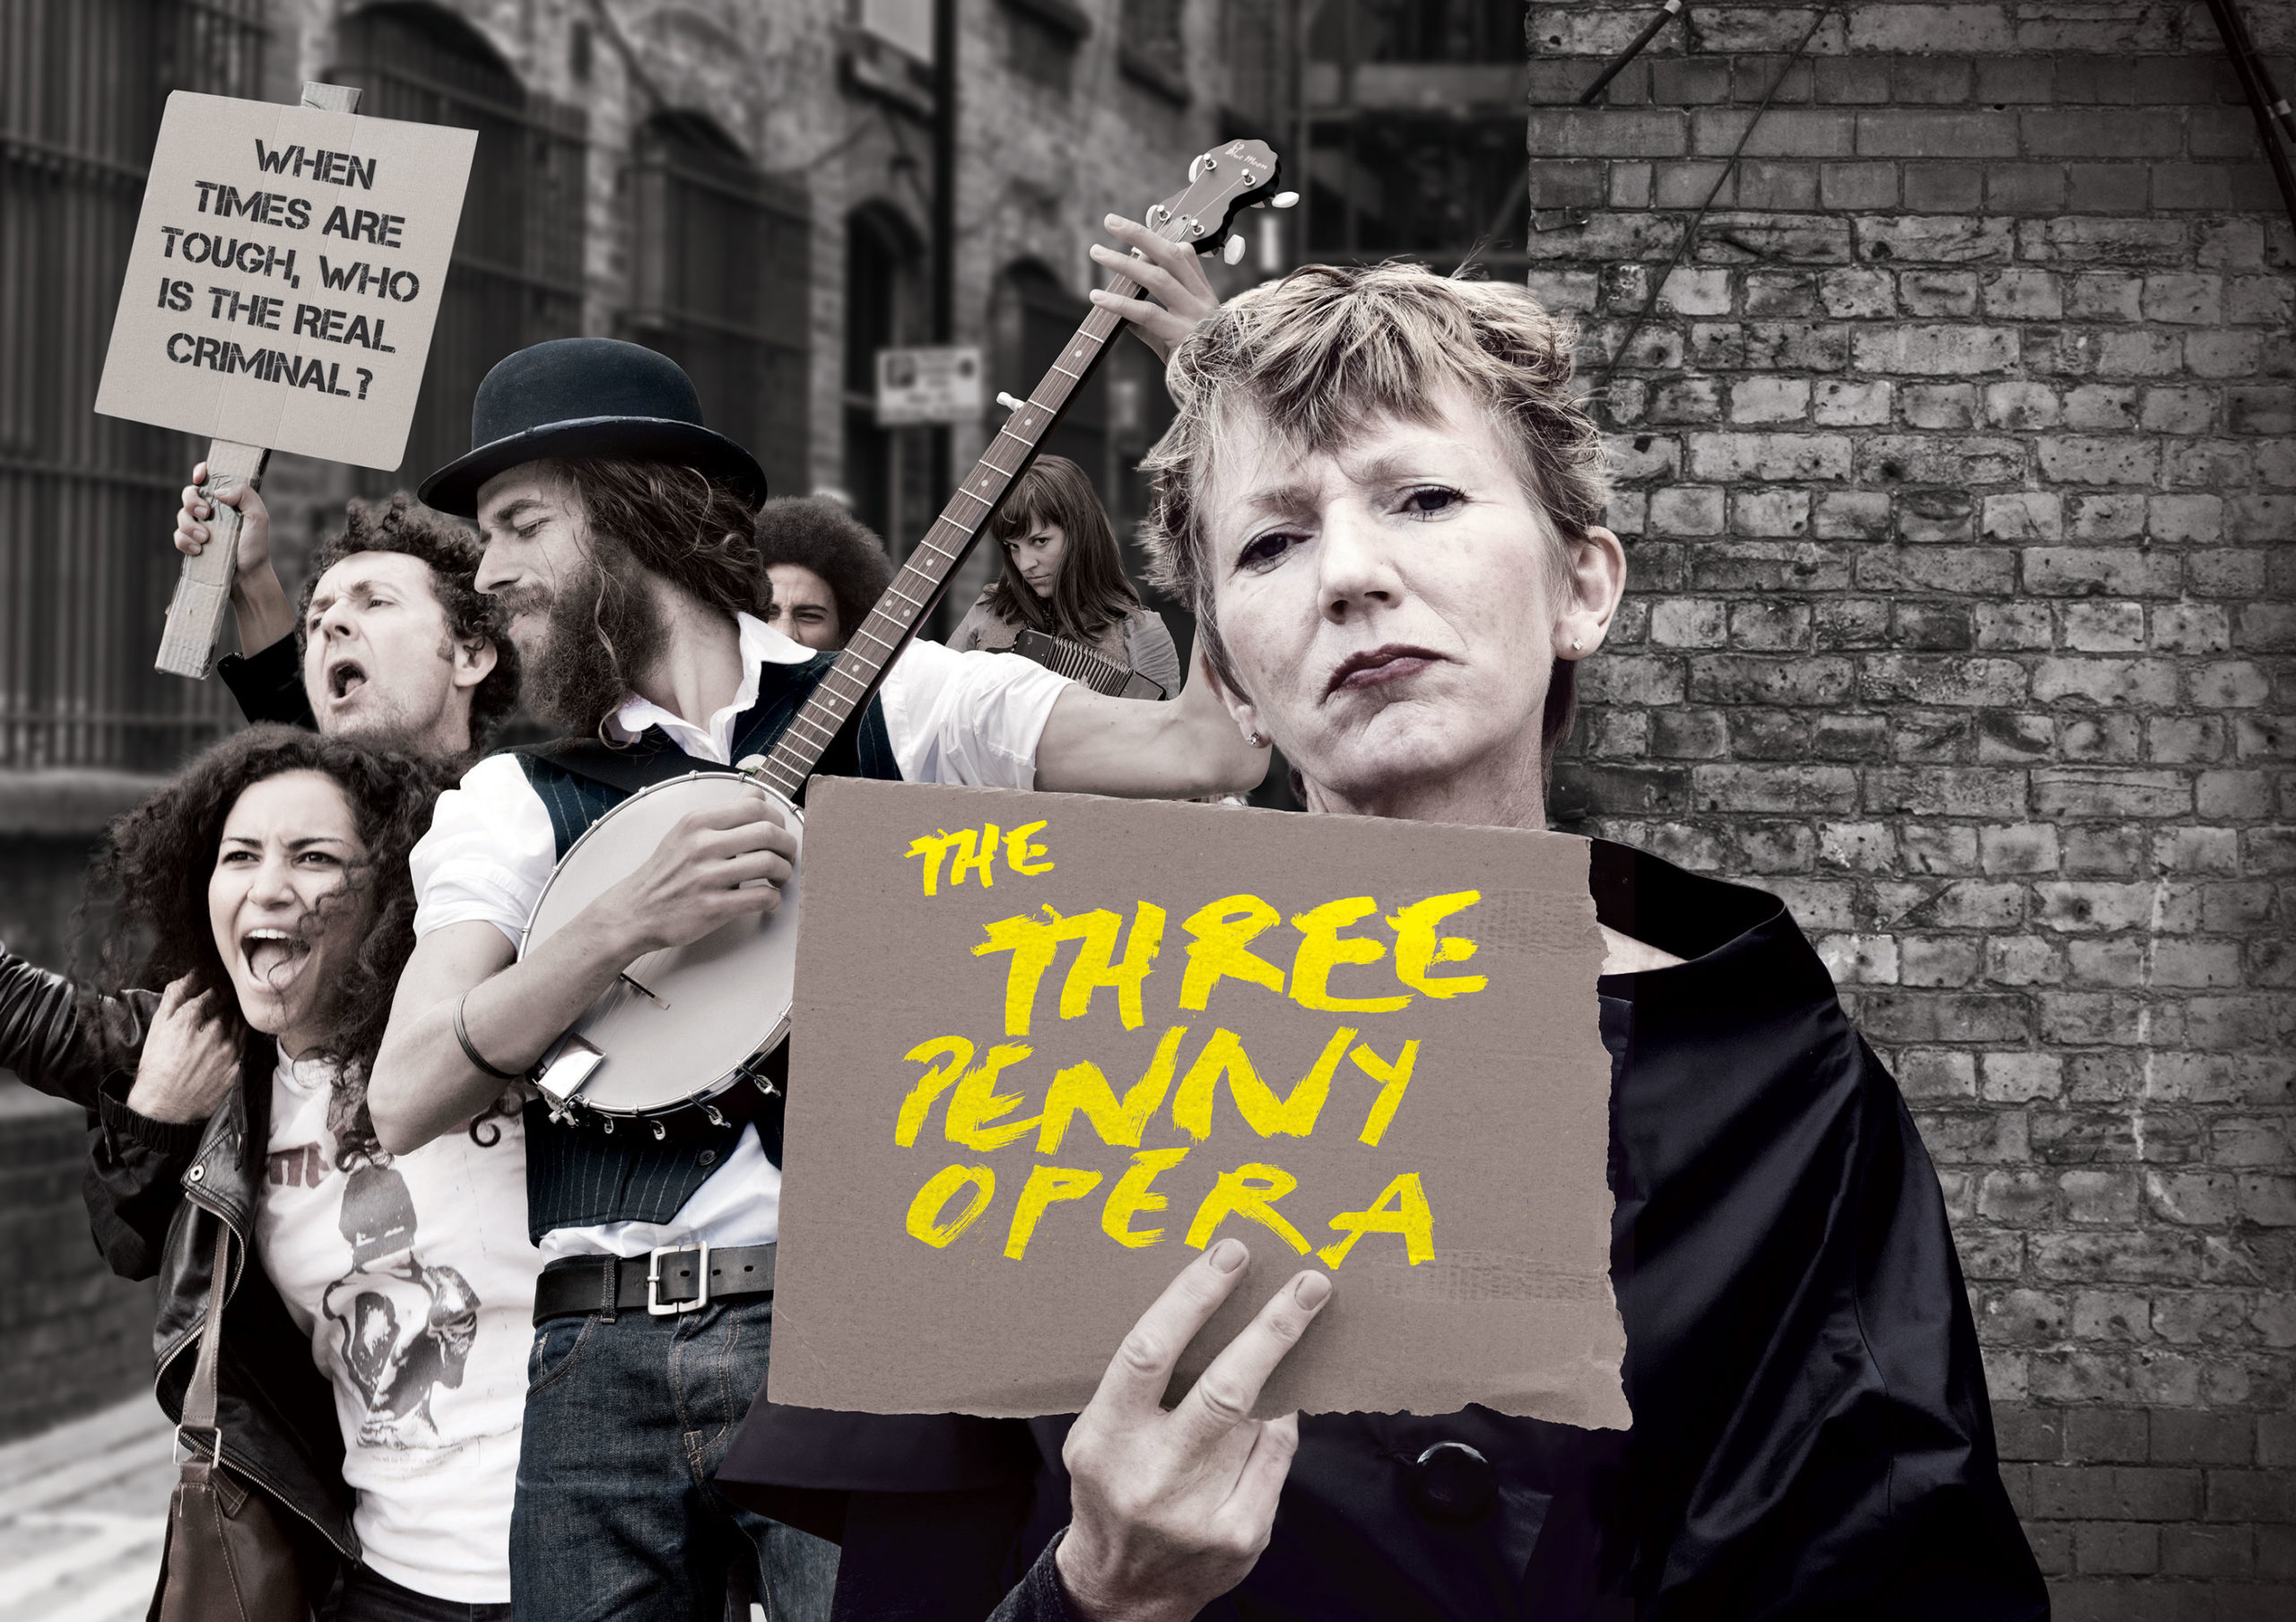 A woman stands and holds a sign that reads The Three Penny Opera. Behind her is a band of people, some holding instruments.